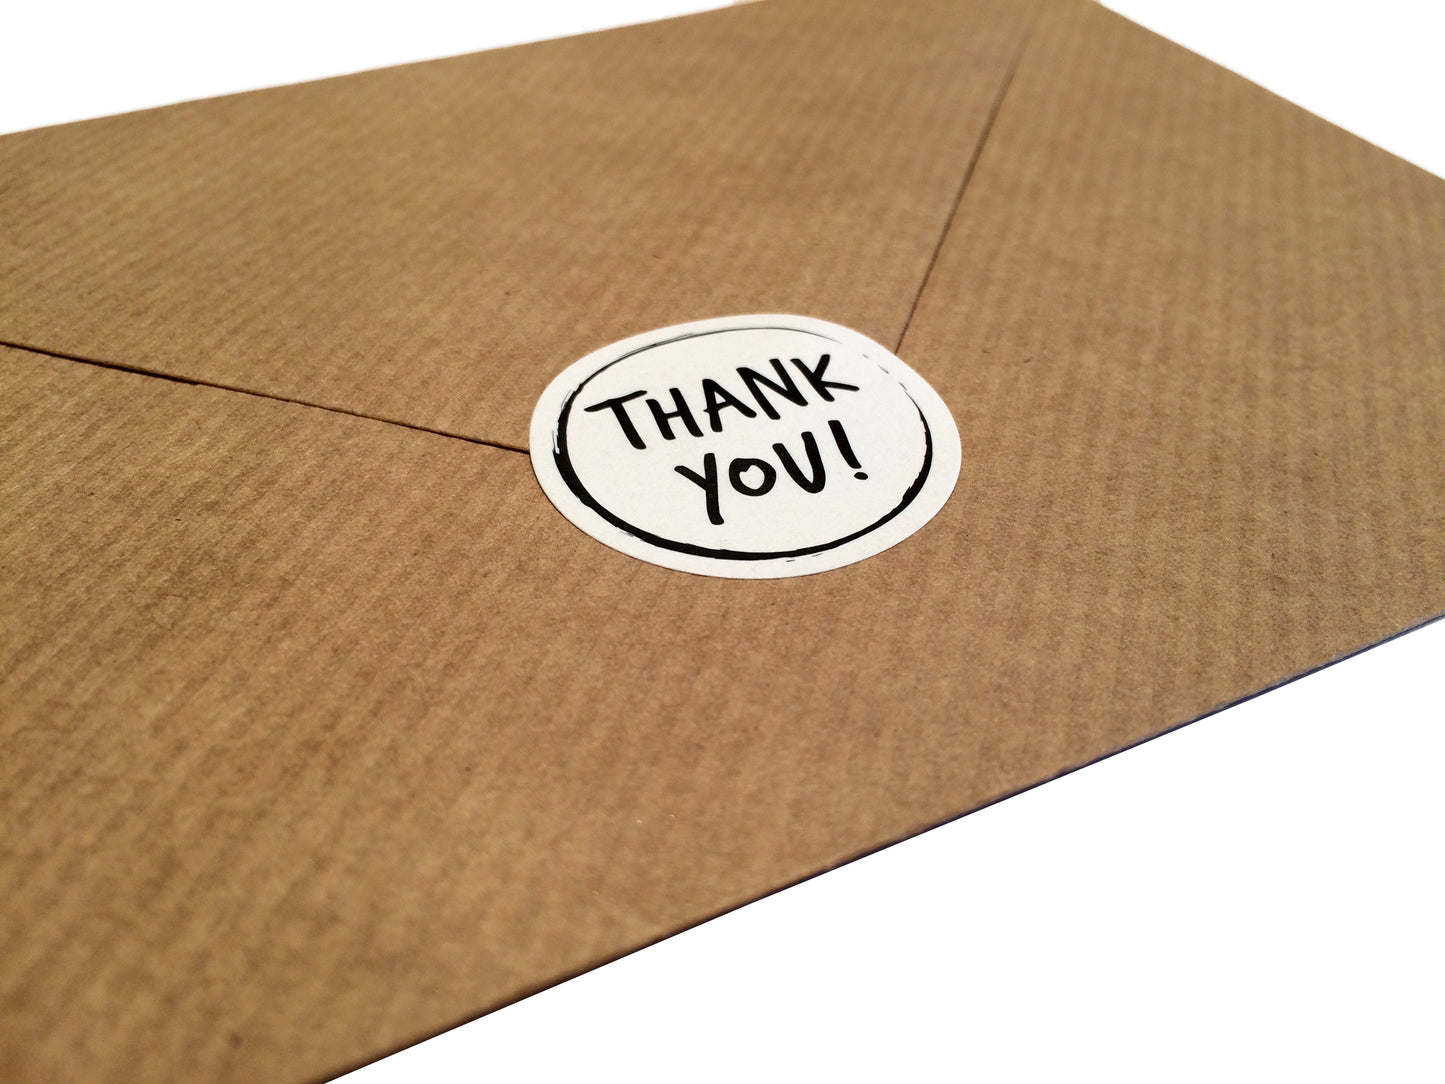 Thank you sticker on back of paper envelope